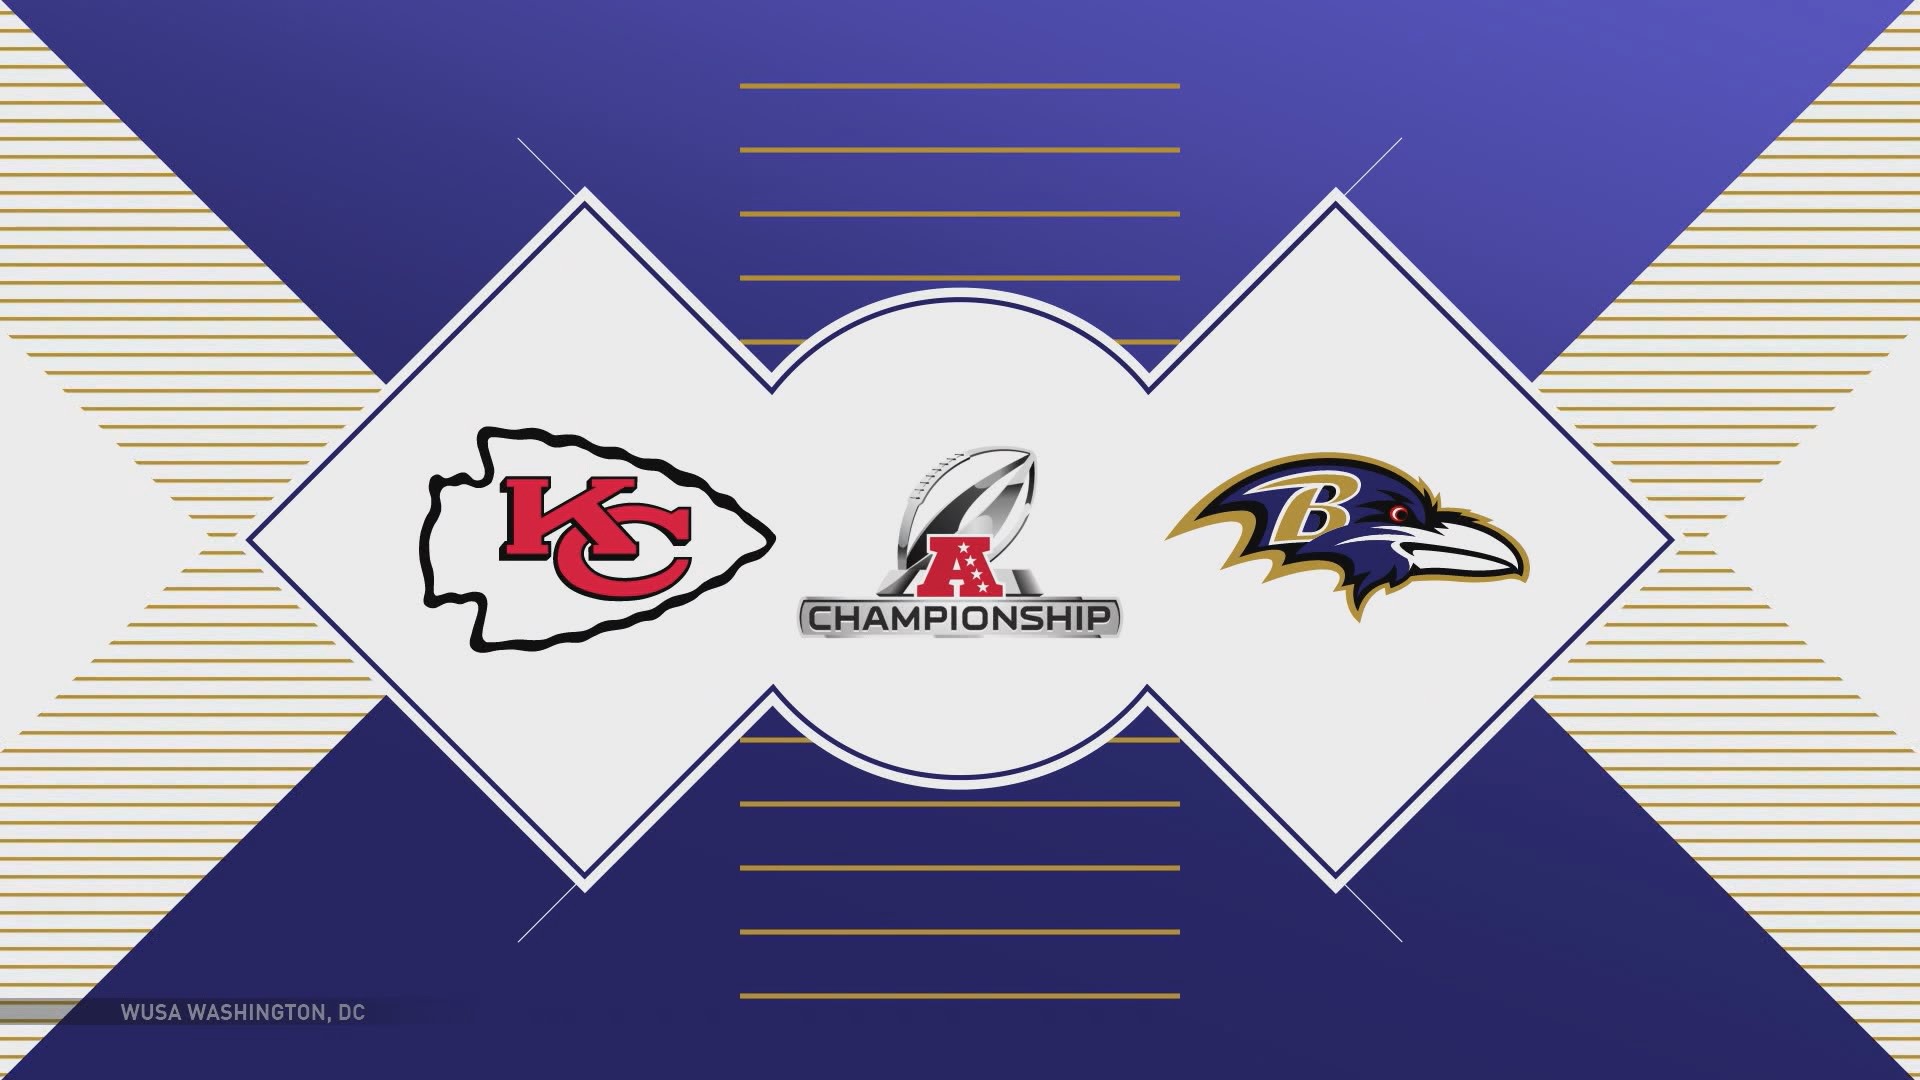 Live post-game coverage from Baltimore as the Kansas City Chiefs punch their ticket to the Super Bowl, defeating the Ravens in the AFC Championship - Taylor Swift